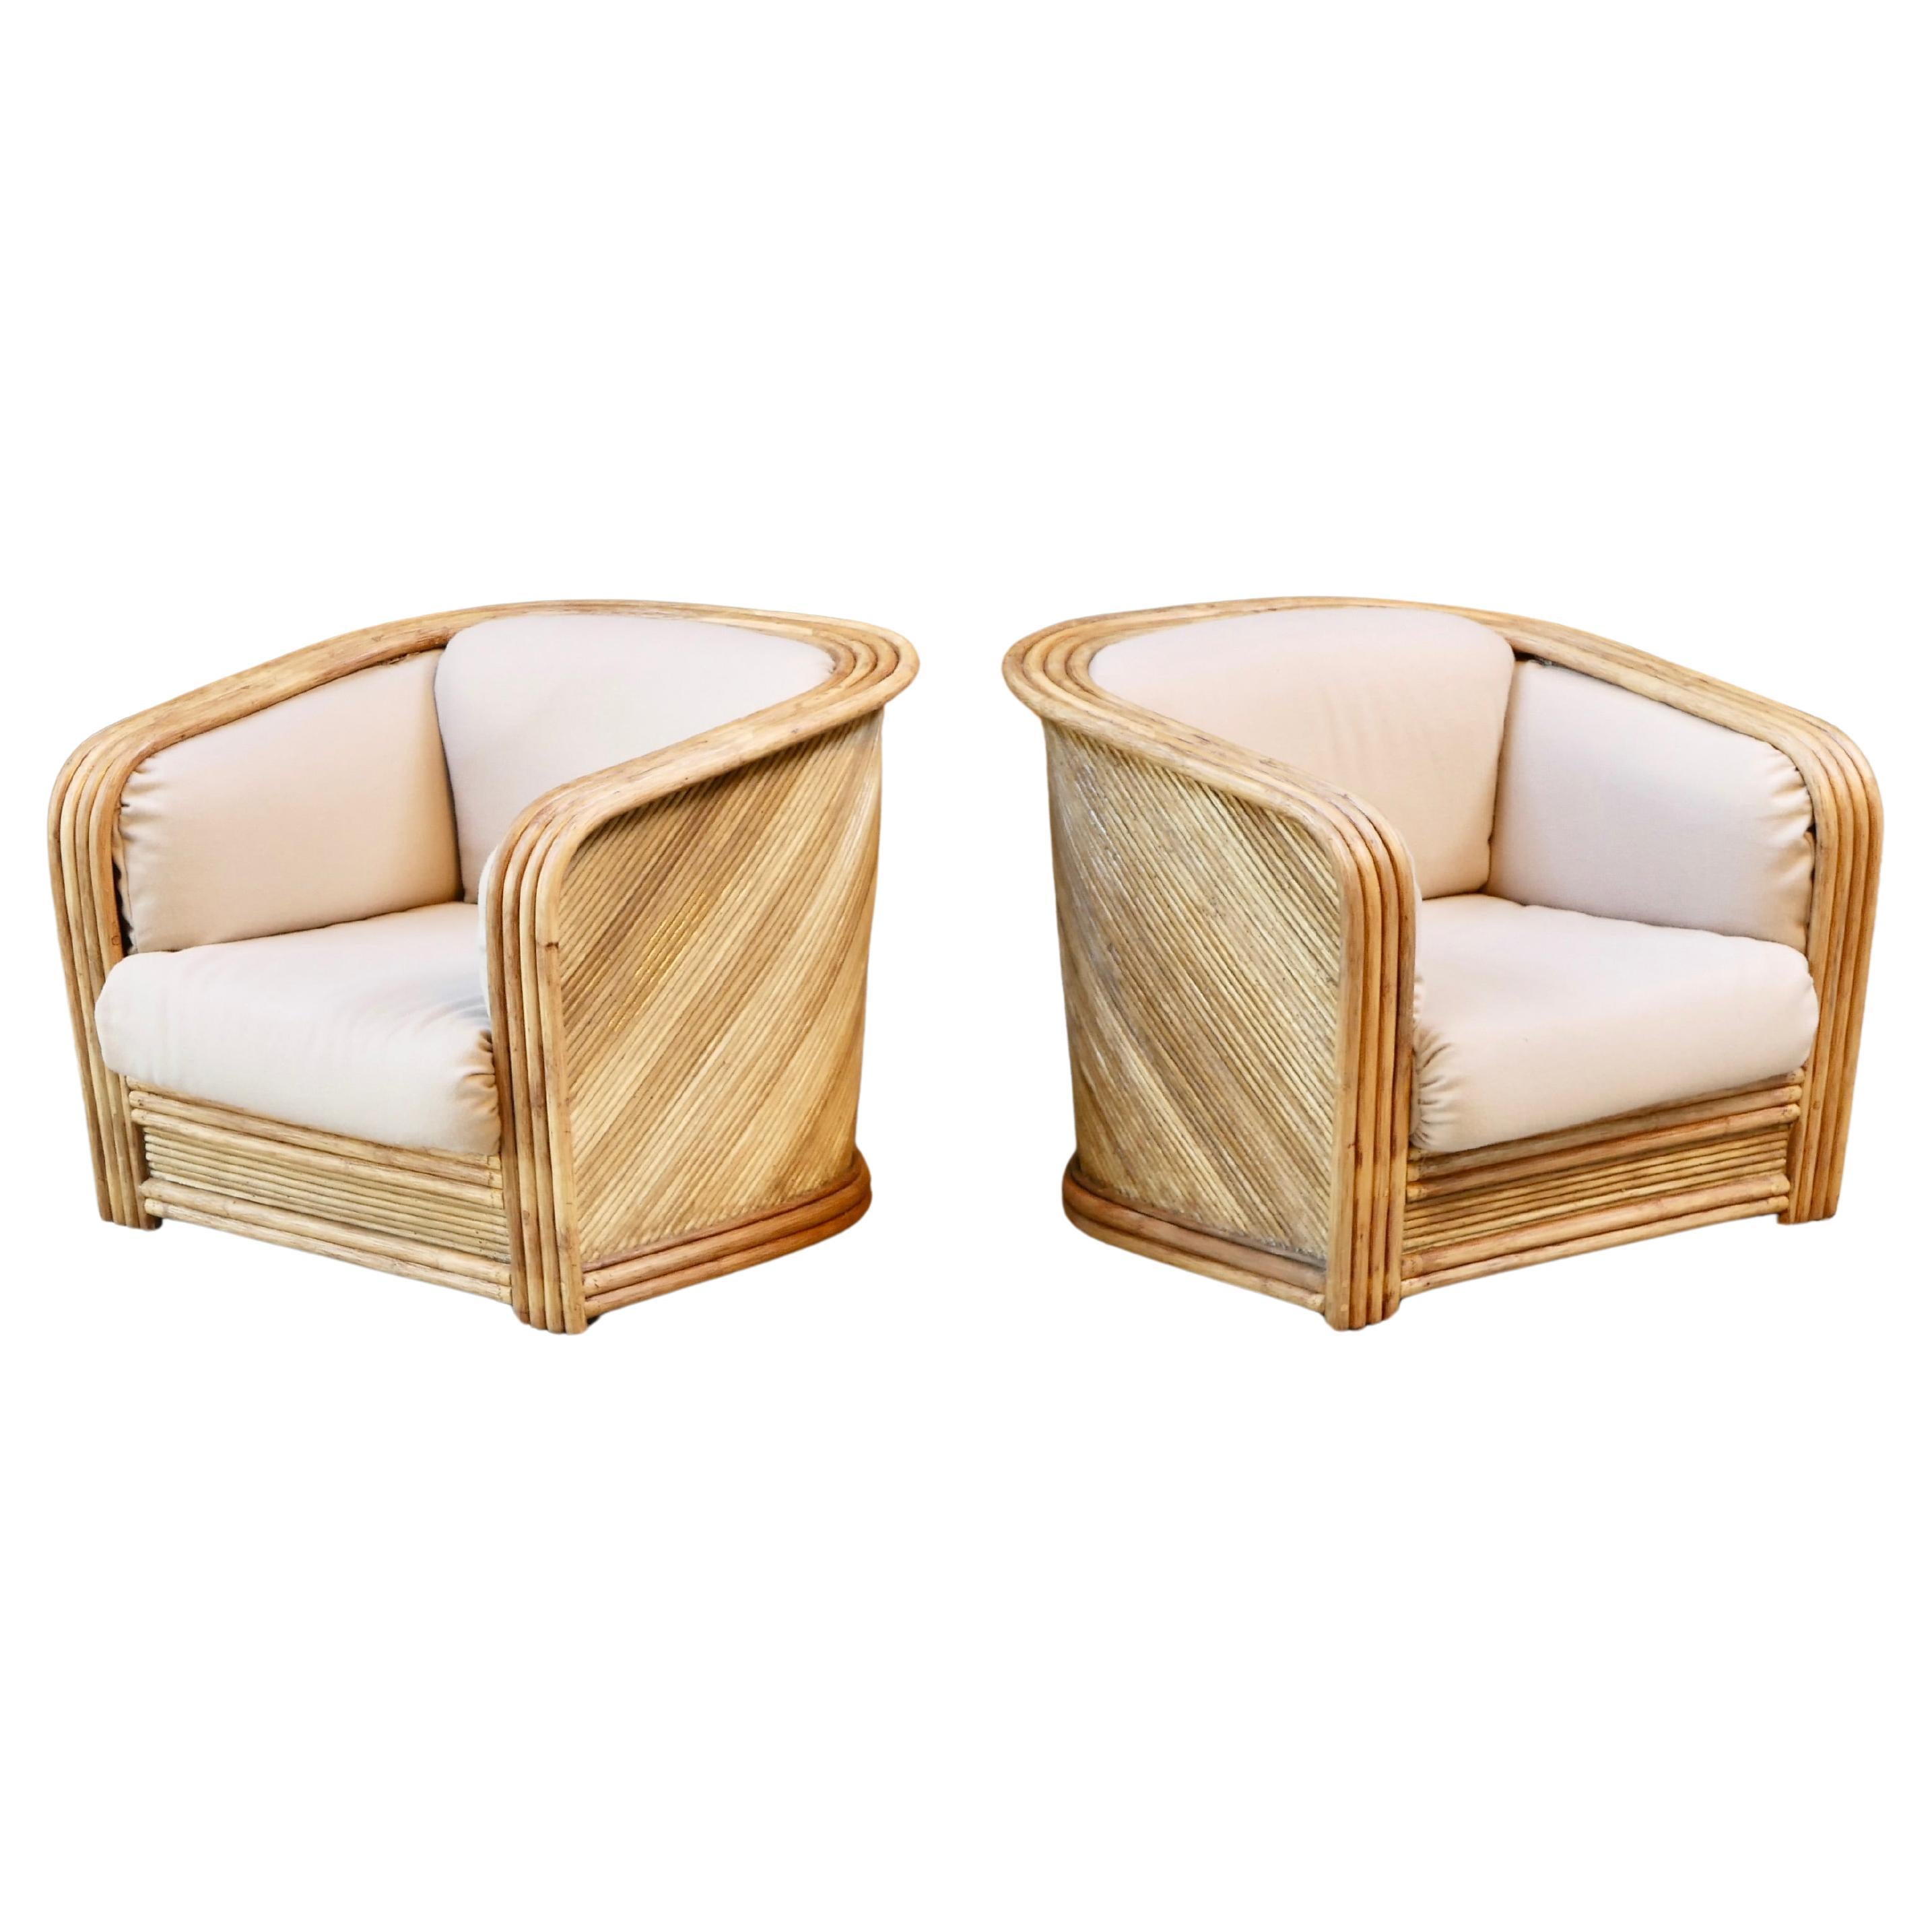 Gorgeous and very rare to find set of two rattan armchairs from the 1980s, made in France by Maugrion 